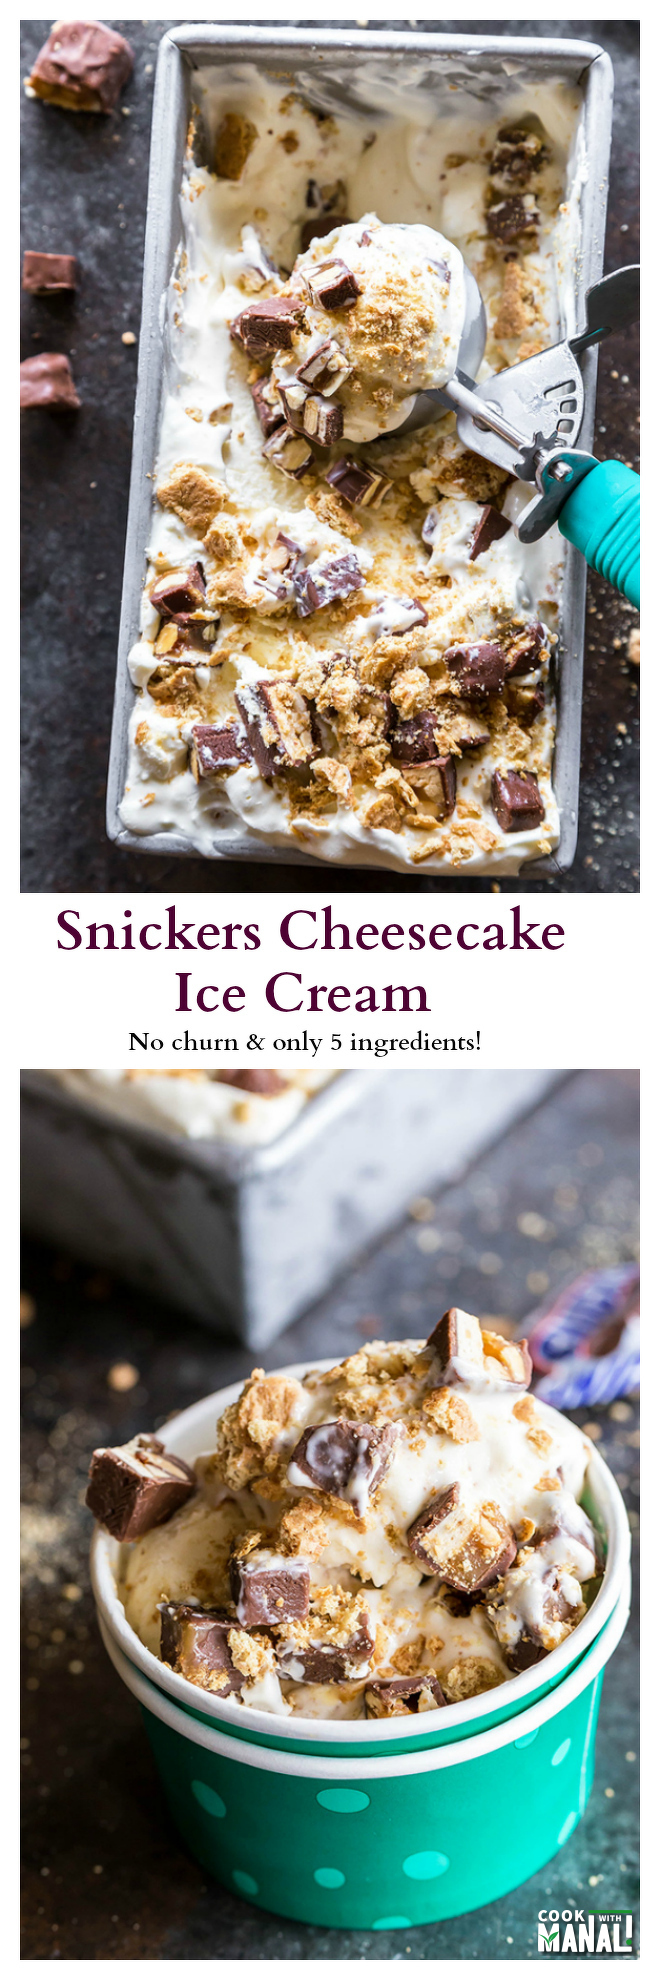 No Churn Snickers Cheesecake Ice Cream Collage